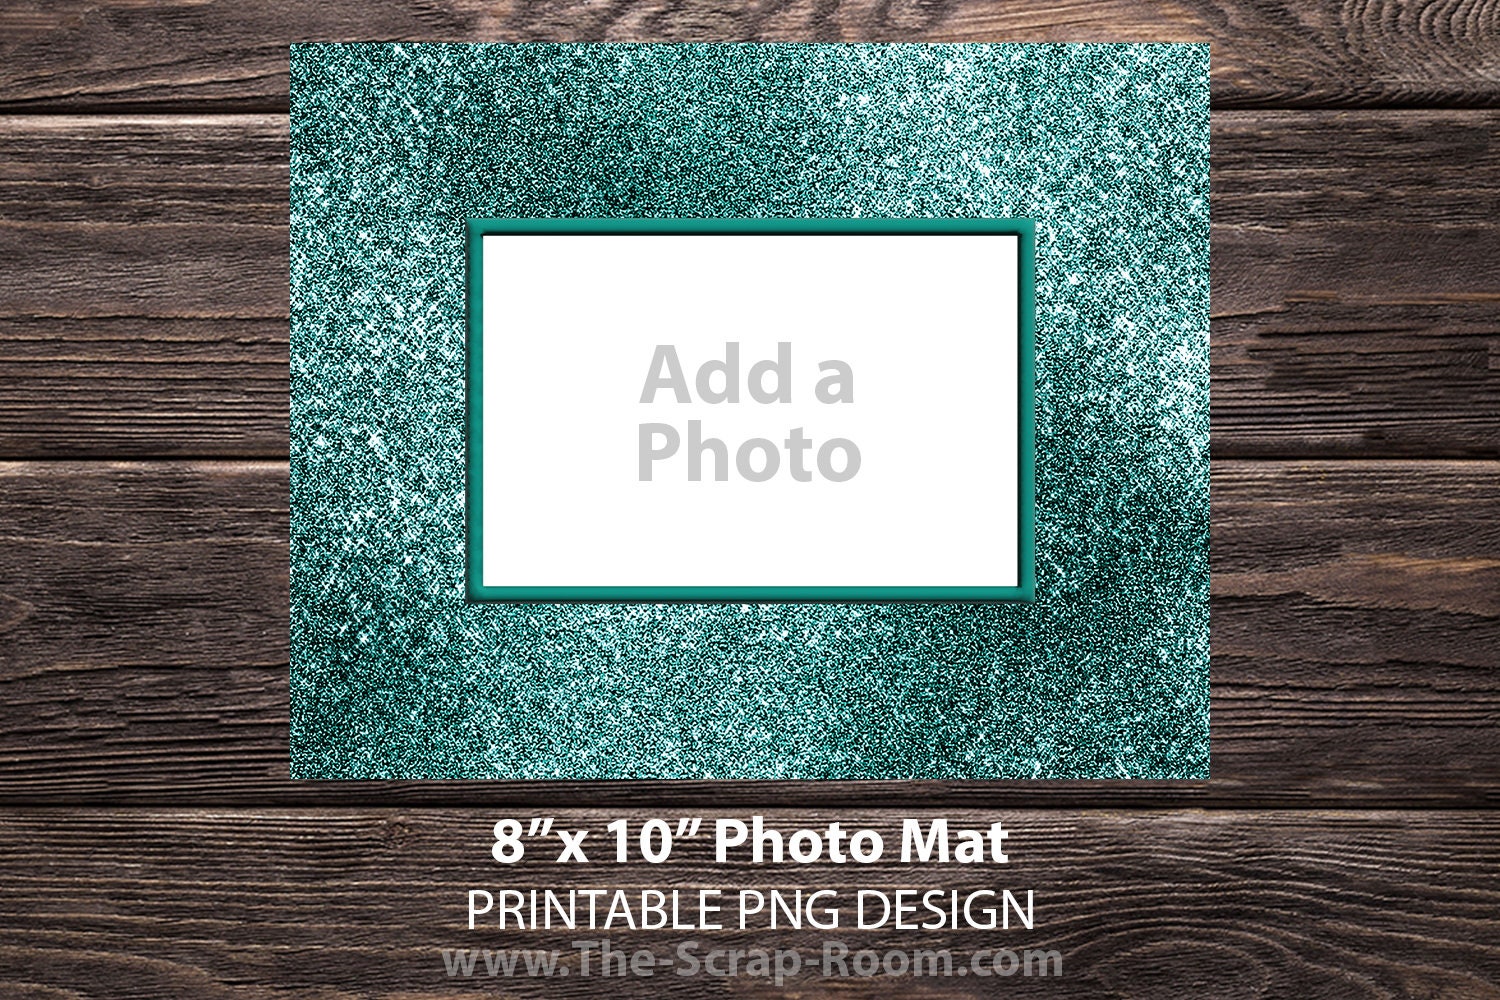 Printable Glitter Photo Mat for 8x10 picture frame: 8x10 photo mat,  matted framing, decor, wall art, picture mat, photo gift, sublimation